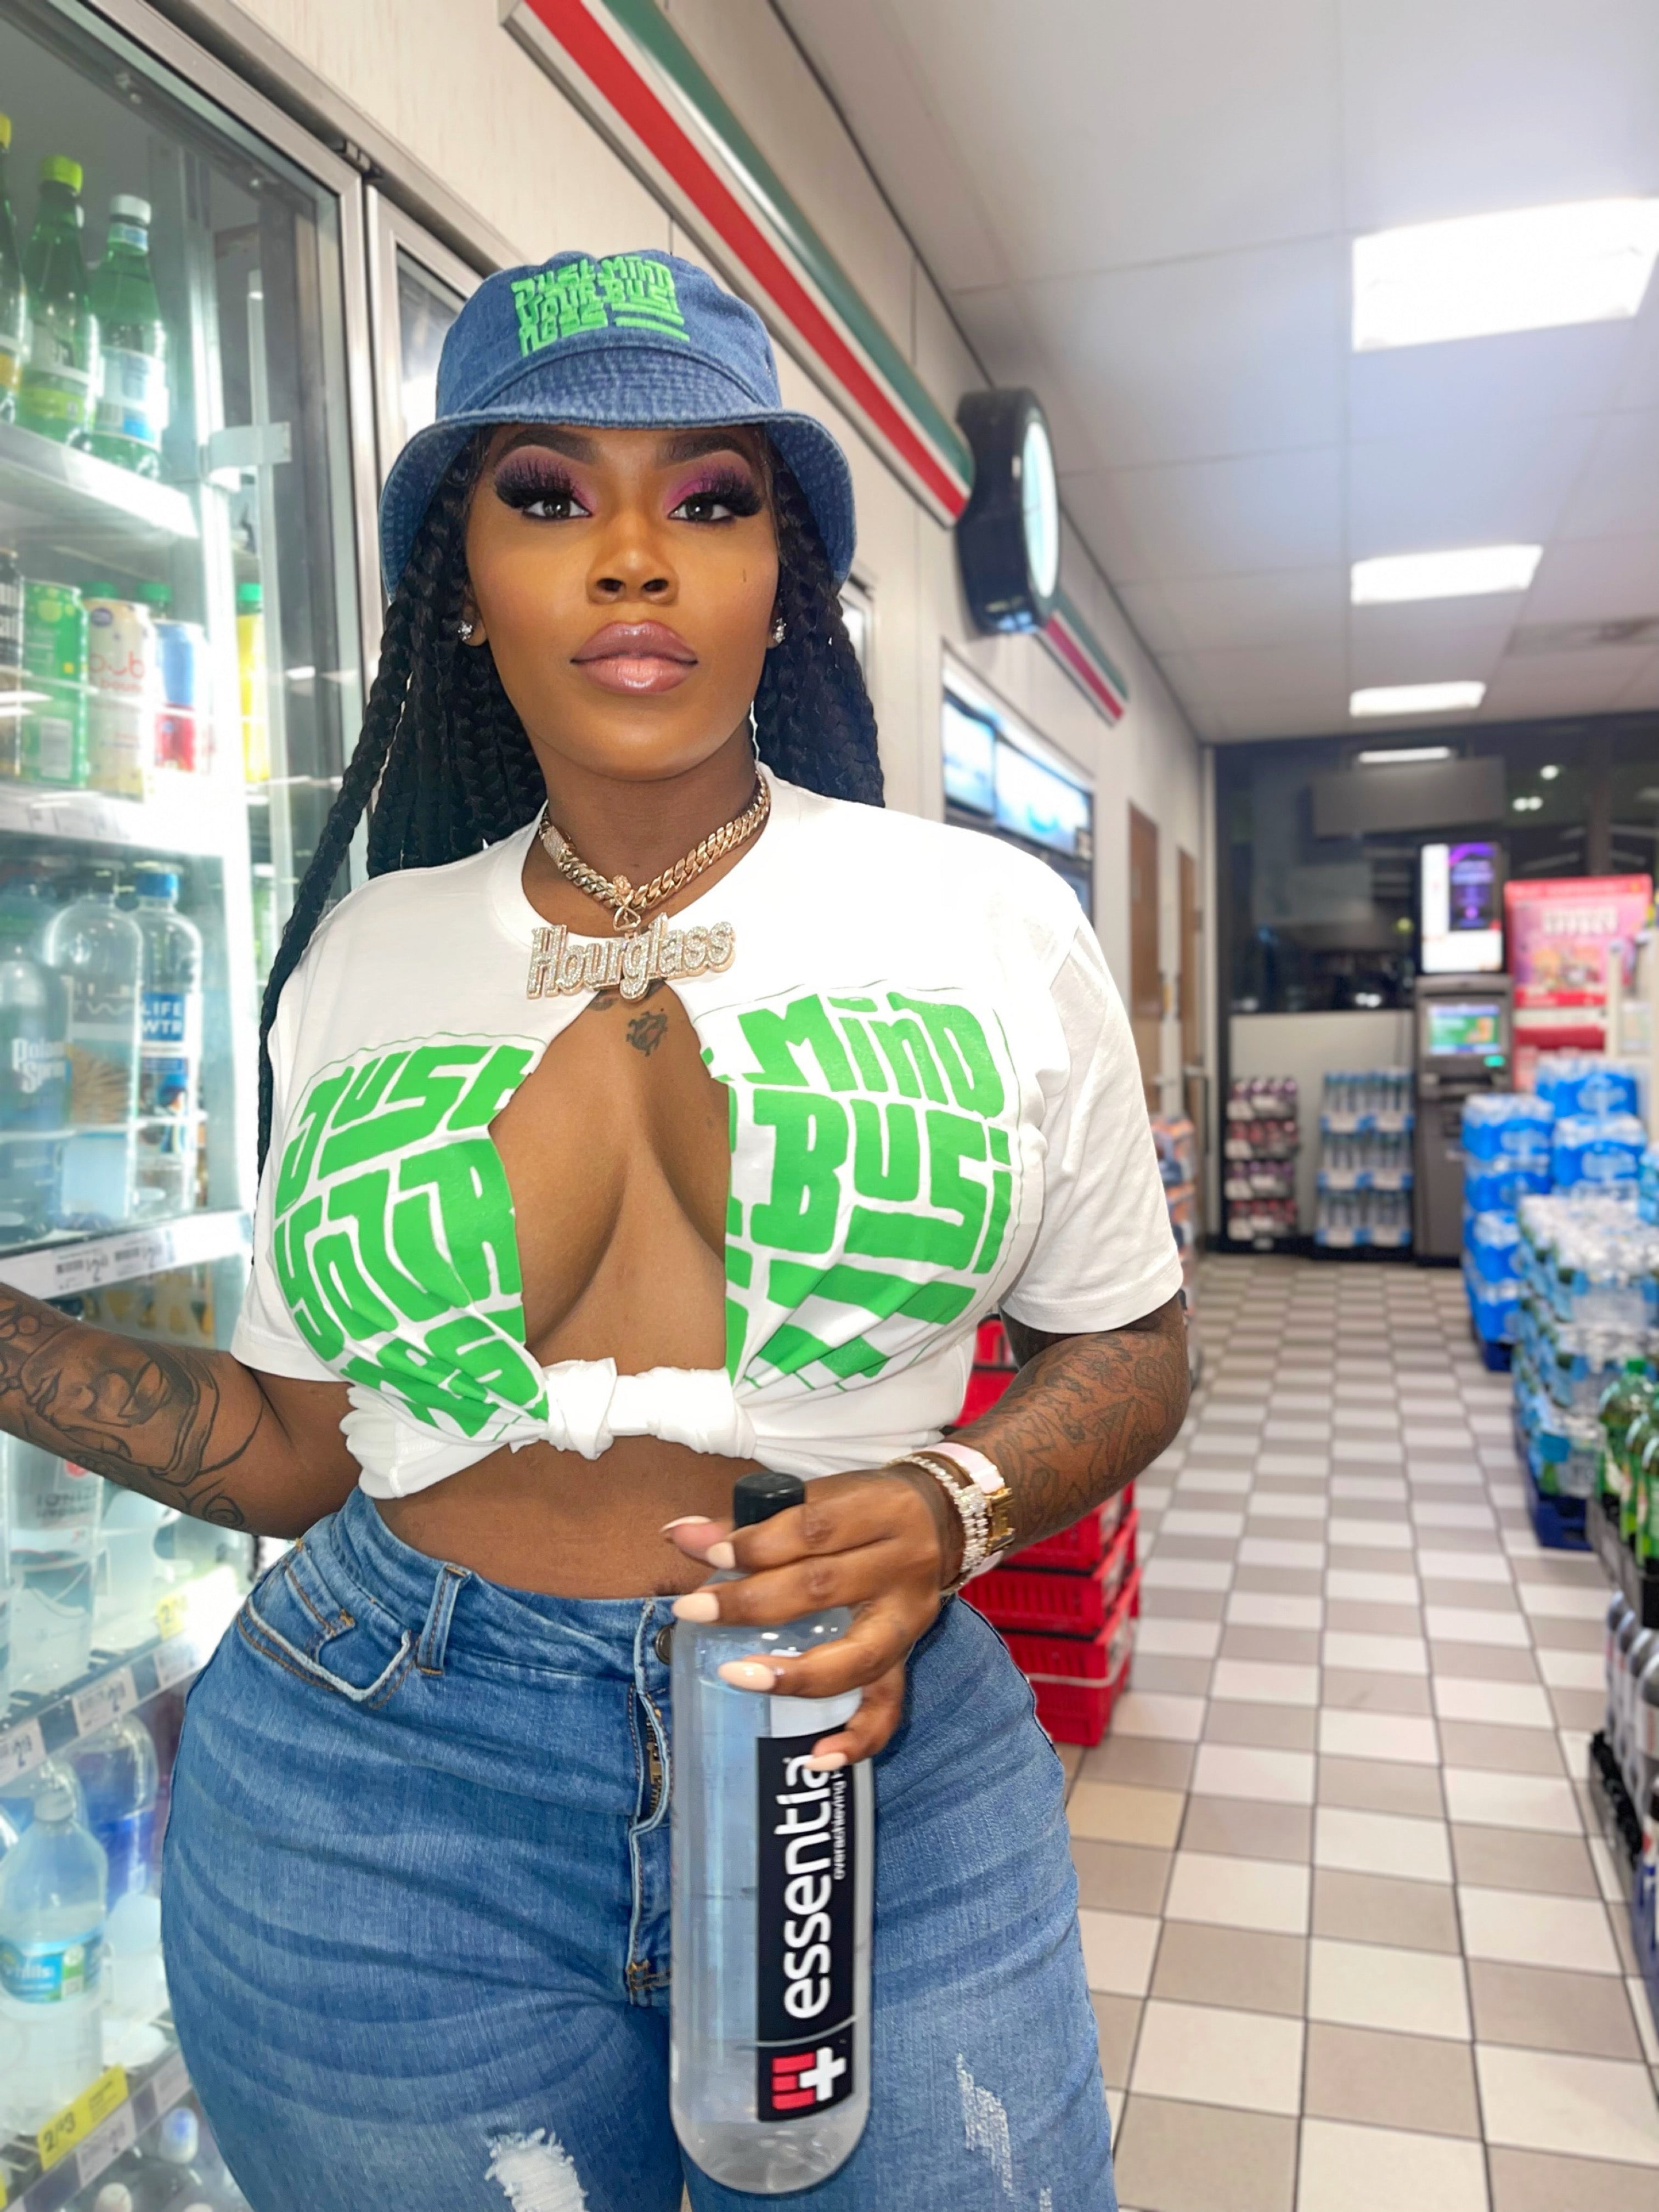 Green just mind your business tee